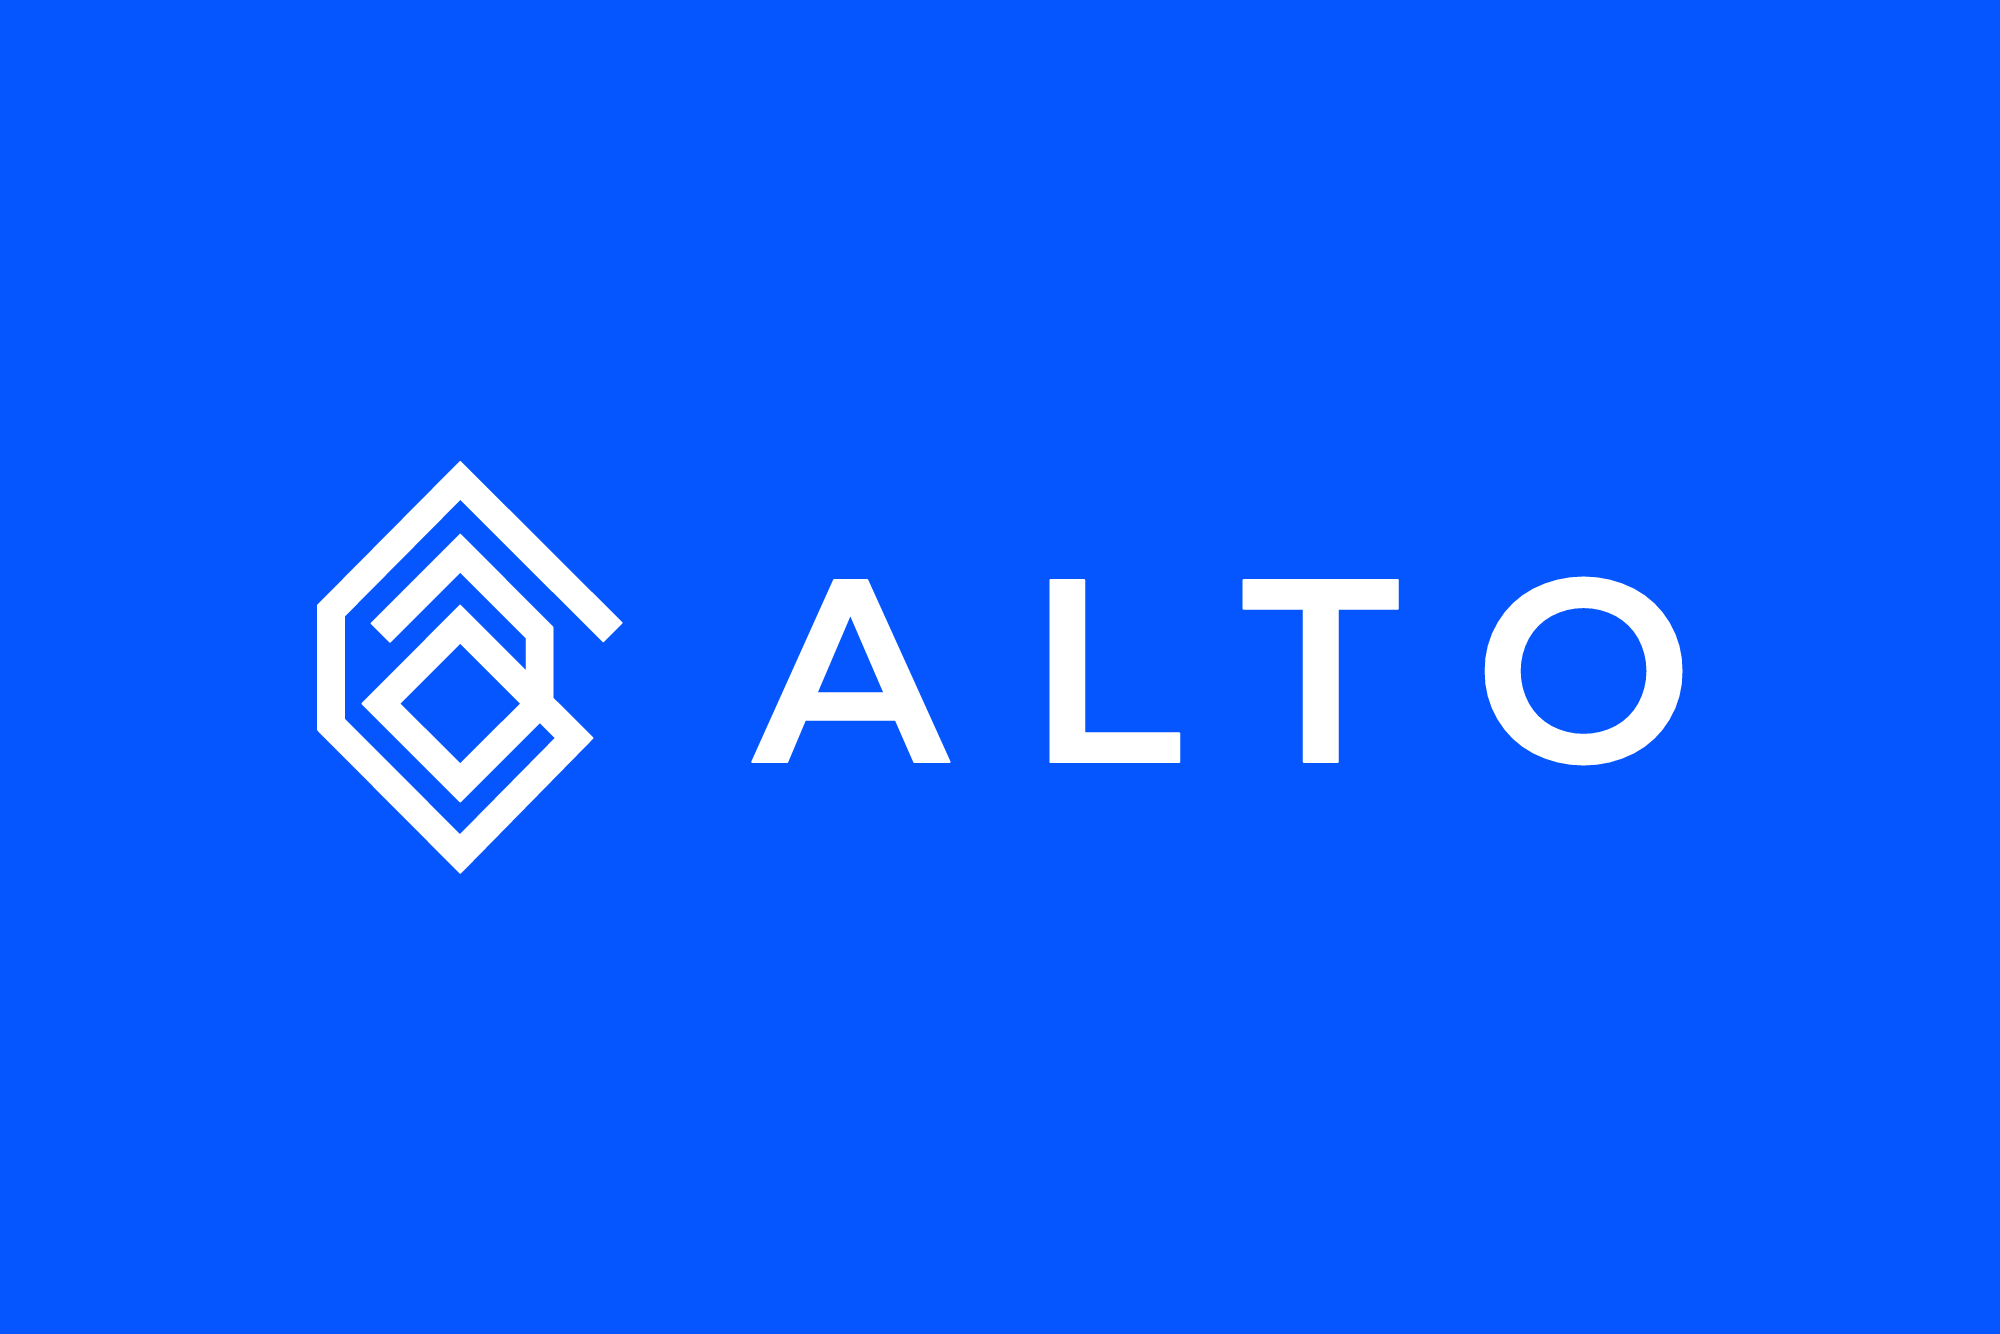 Alto Closes $40 Million Series B Funding Round to Help More People Use Their Retirement Dollars to Invest in Alternative Assets Including Crypto